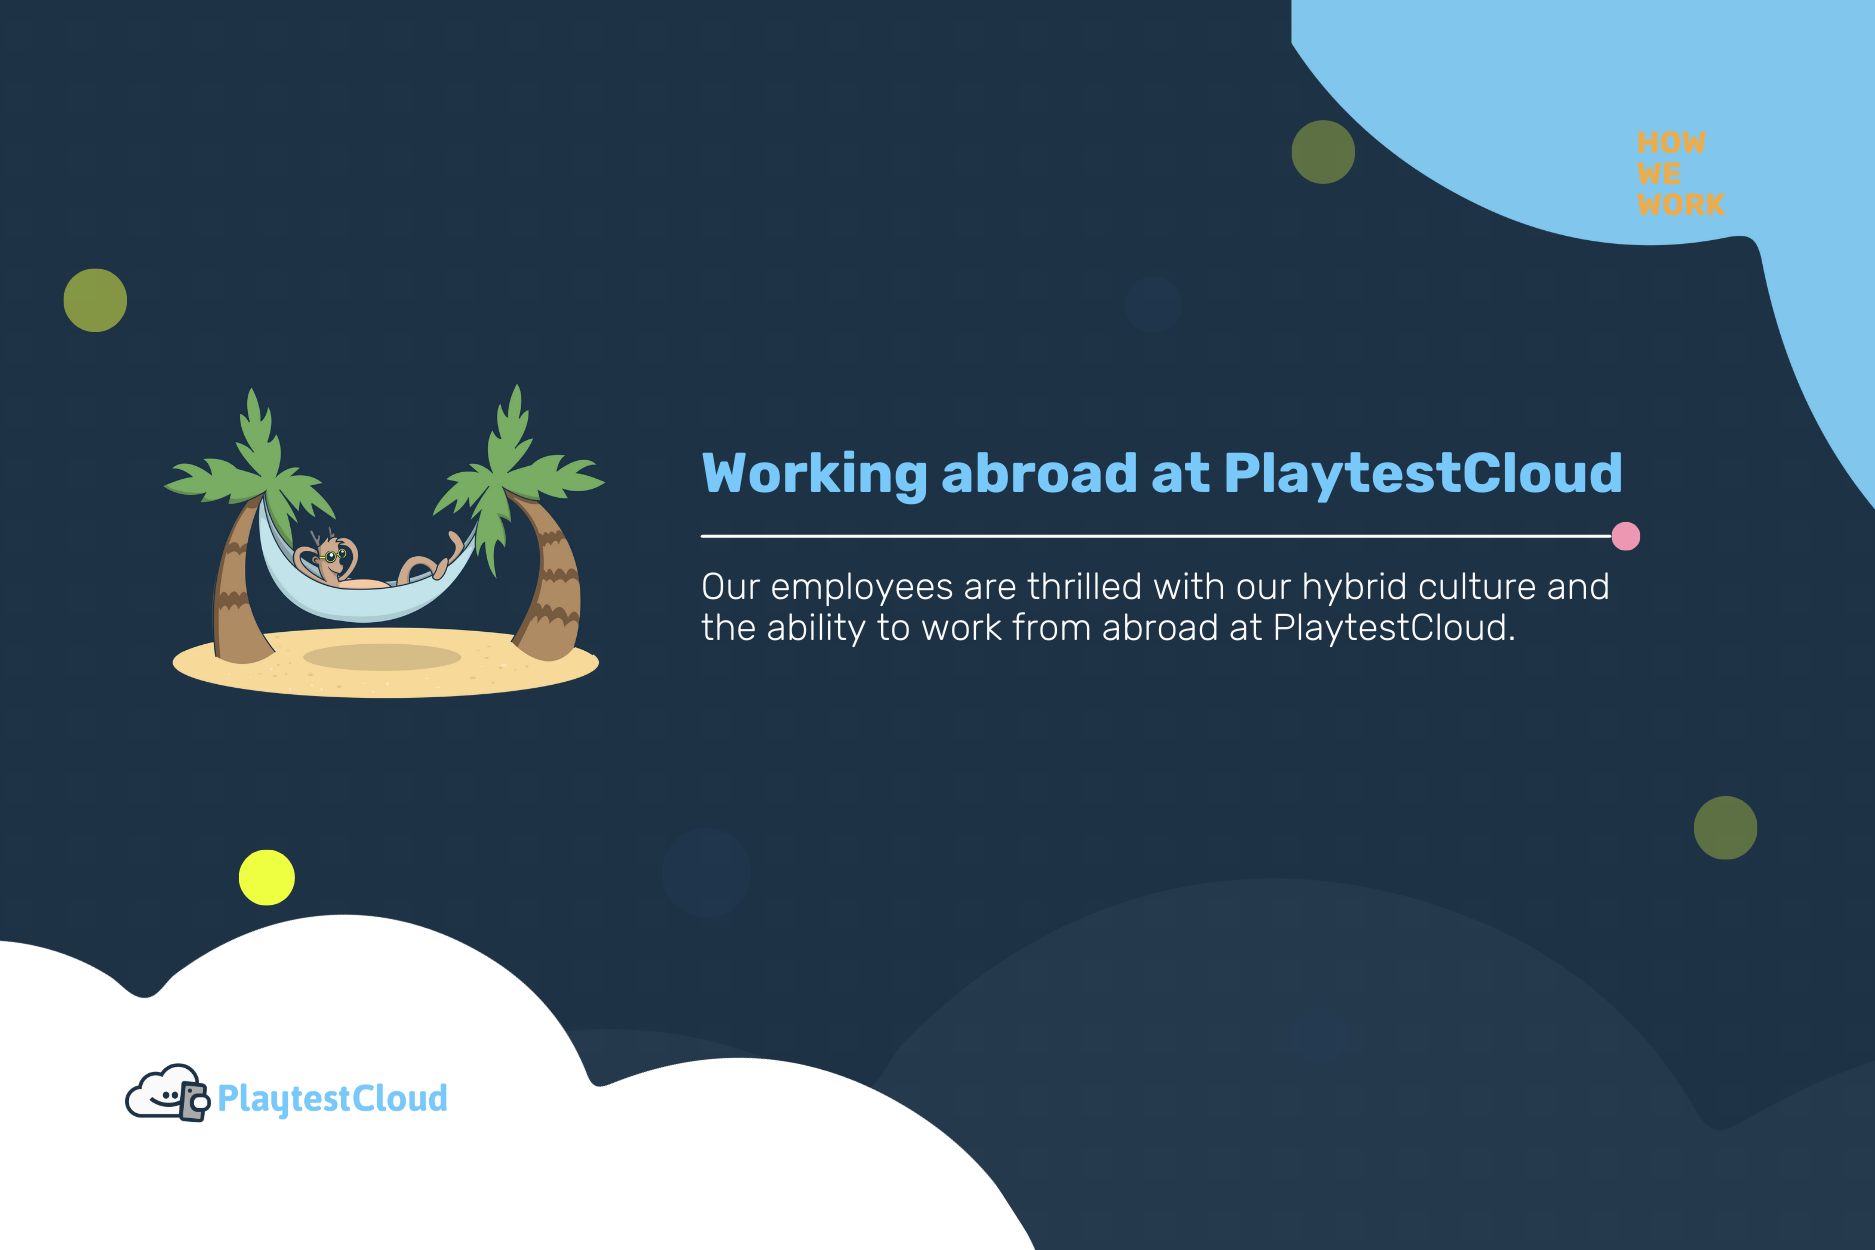 Working abroad in our hybrid culture at PlaytestCloud